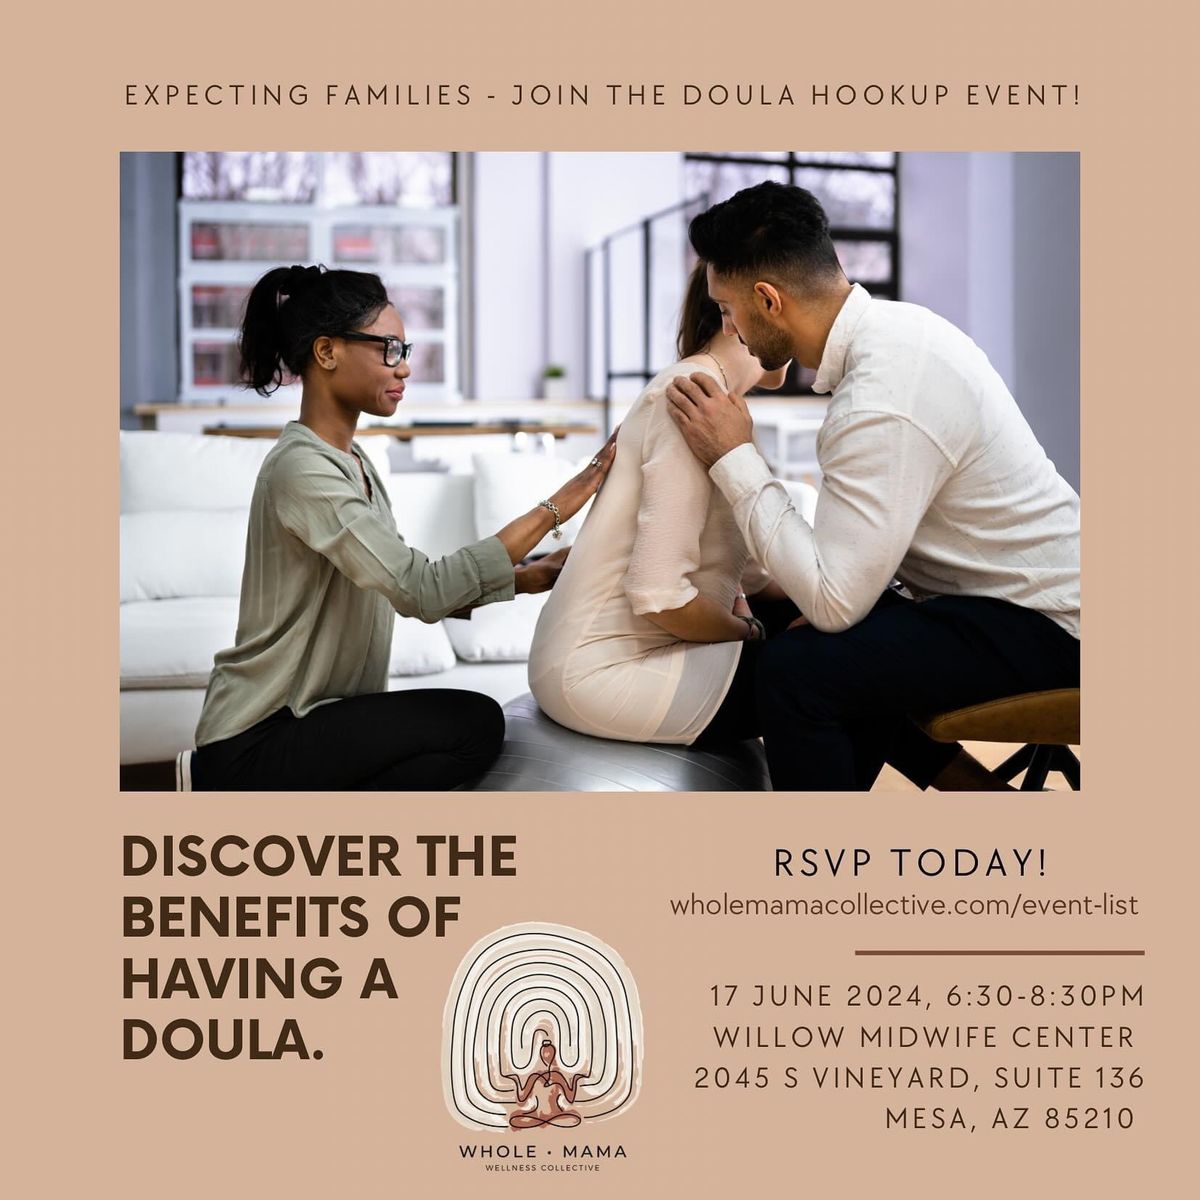 The Doula Hook Up